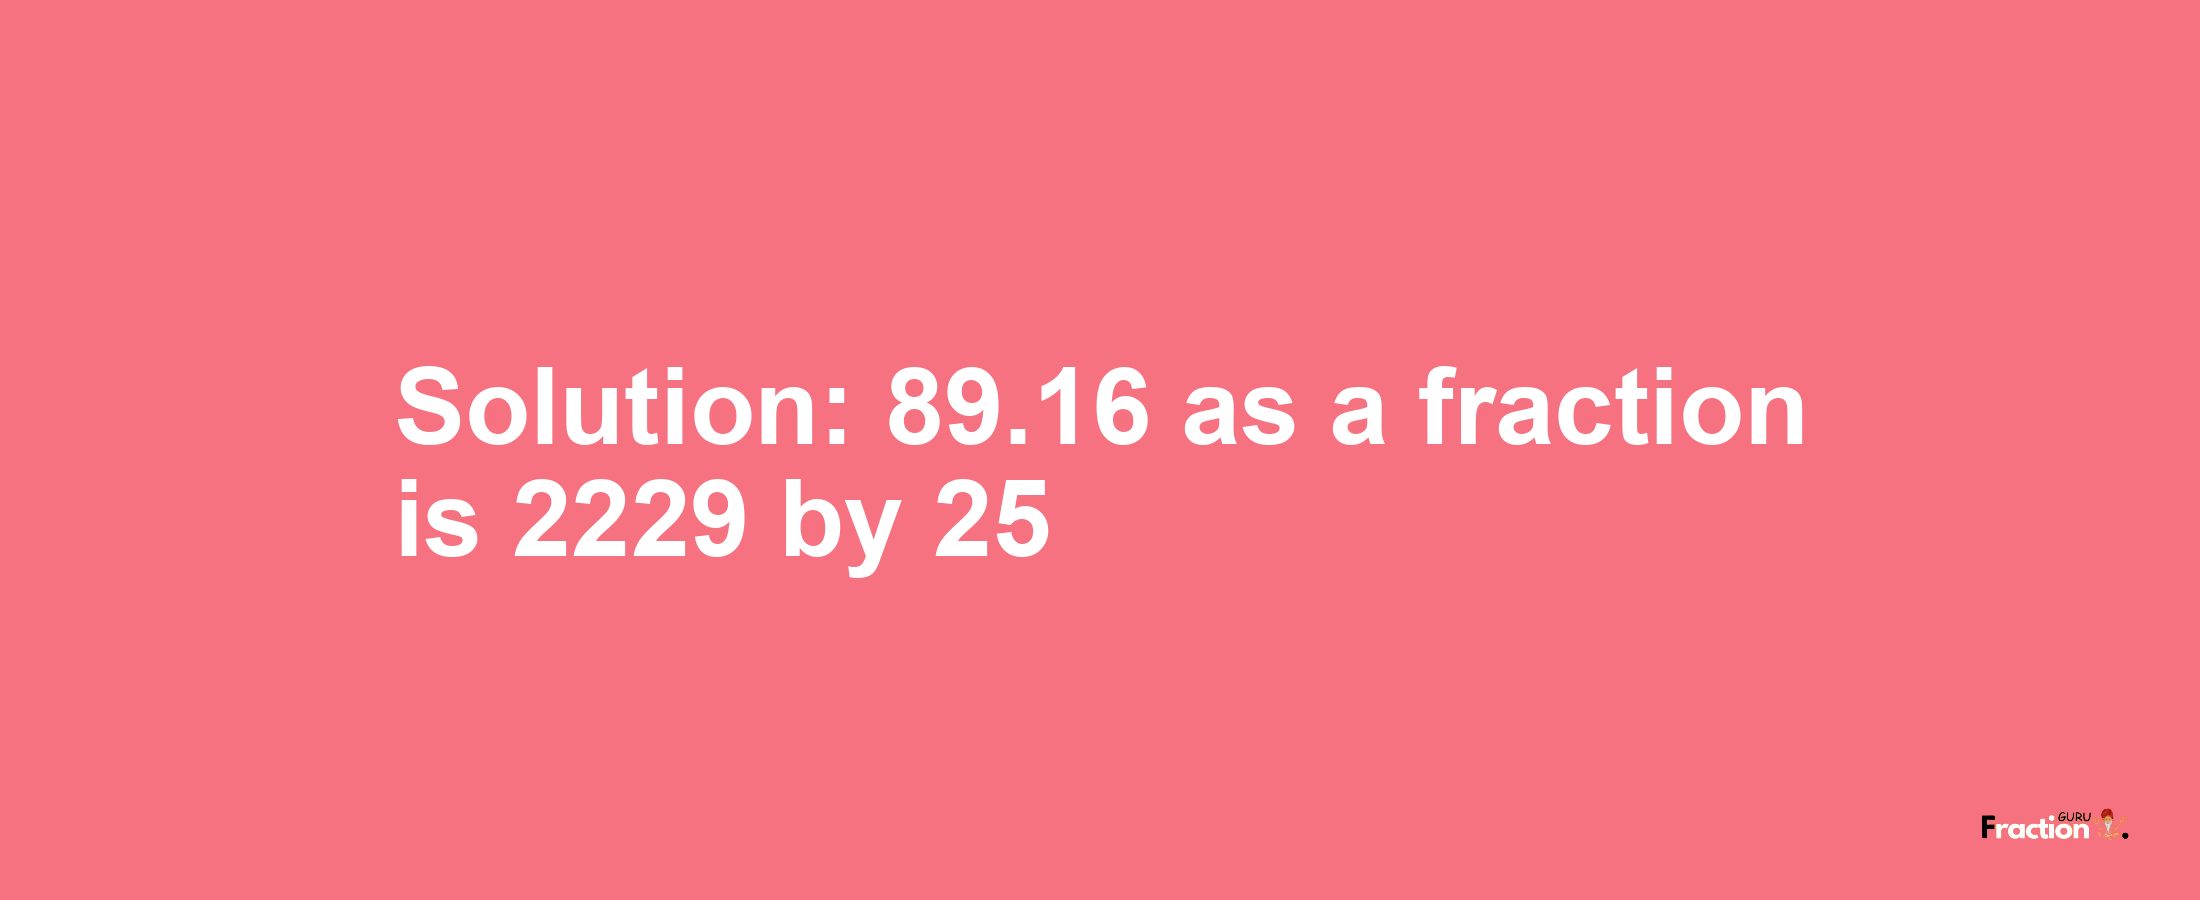 Solution:89.16 as a fraction is 2229/25